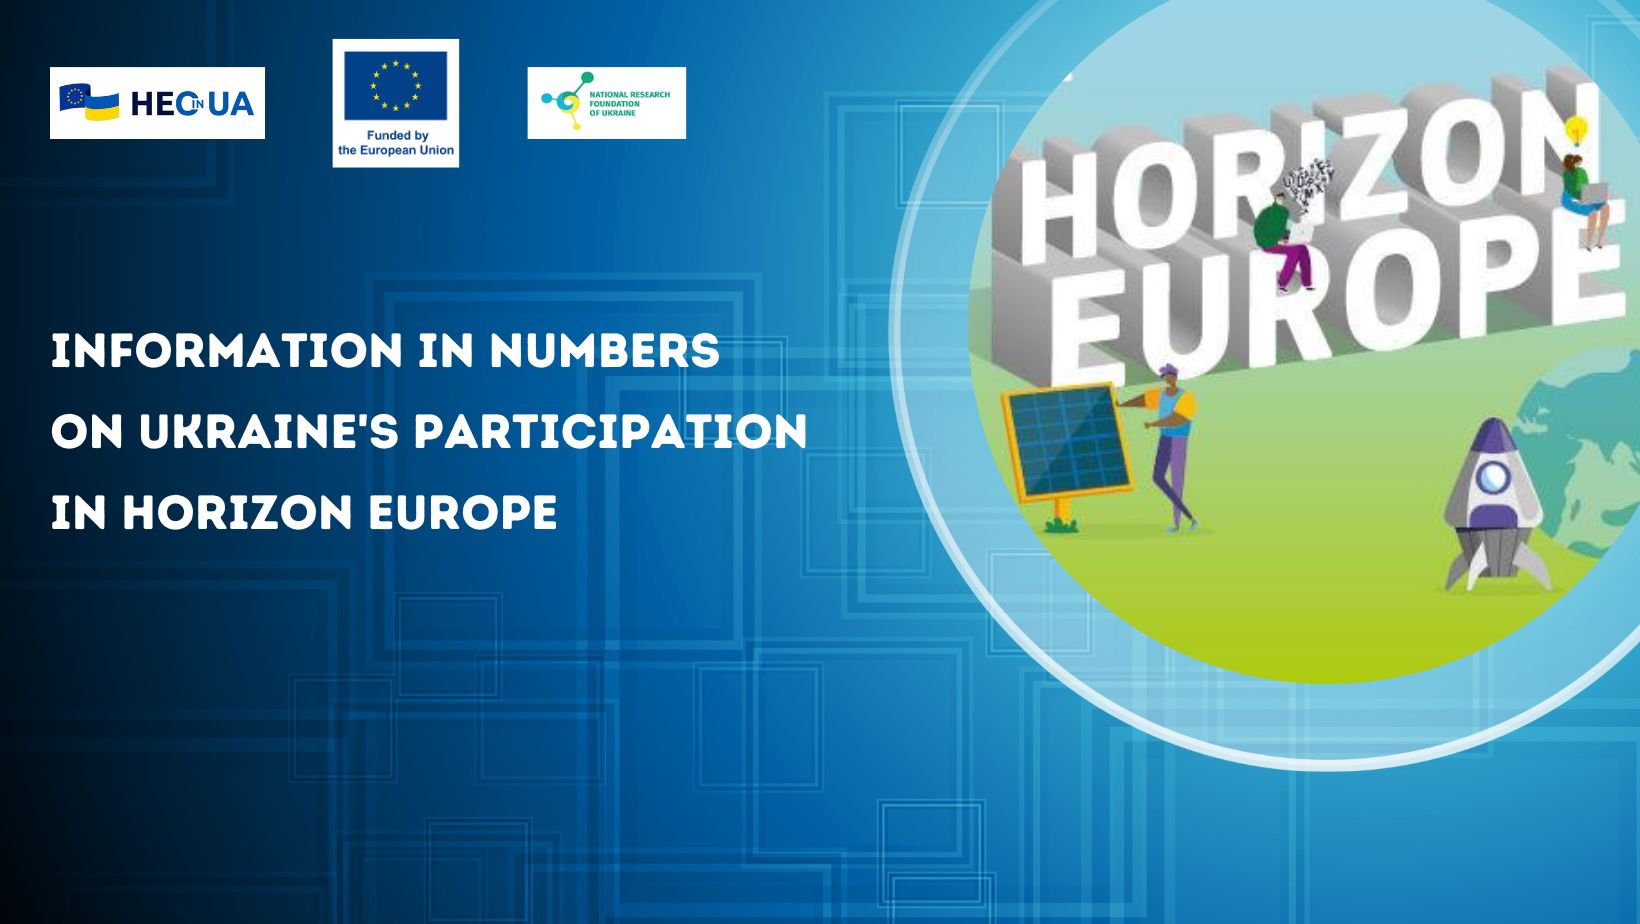 Information in numbers on Ukraine’s participation in Horizon Europe